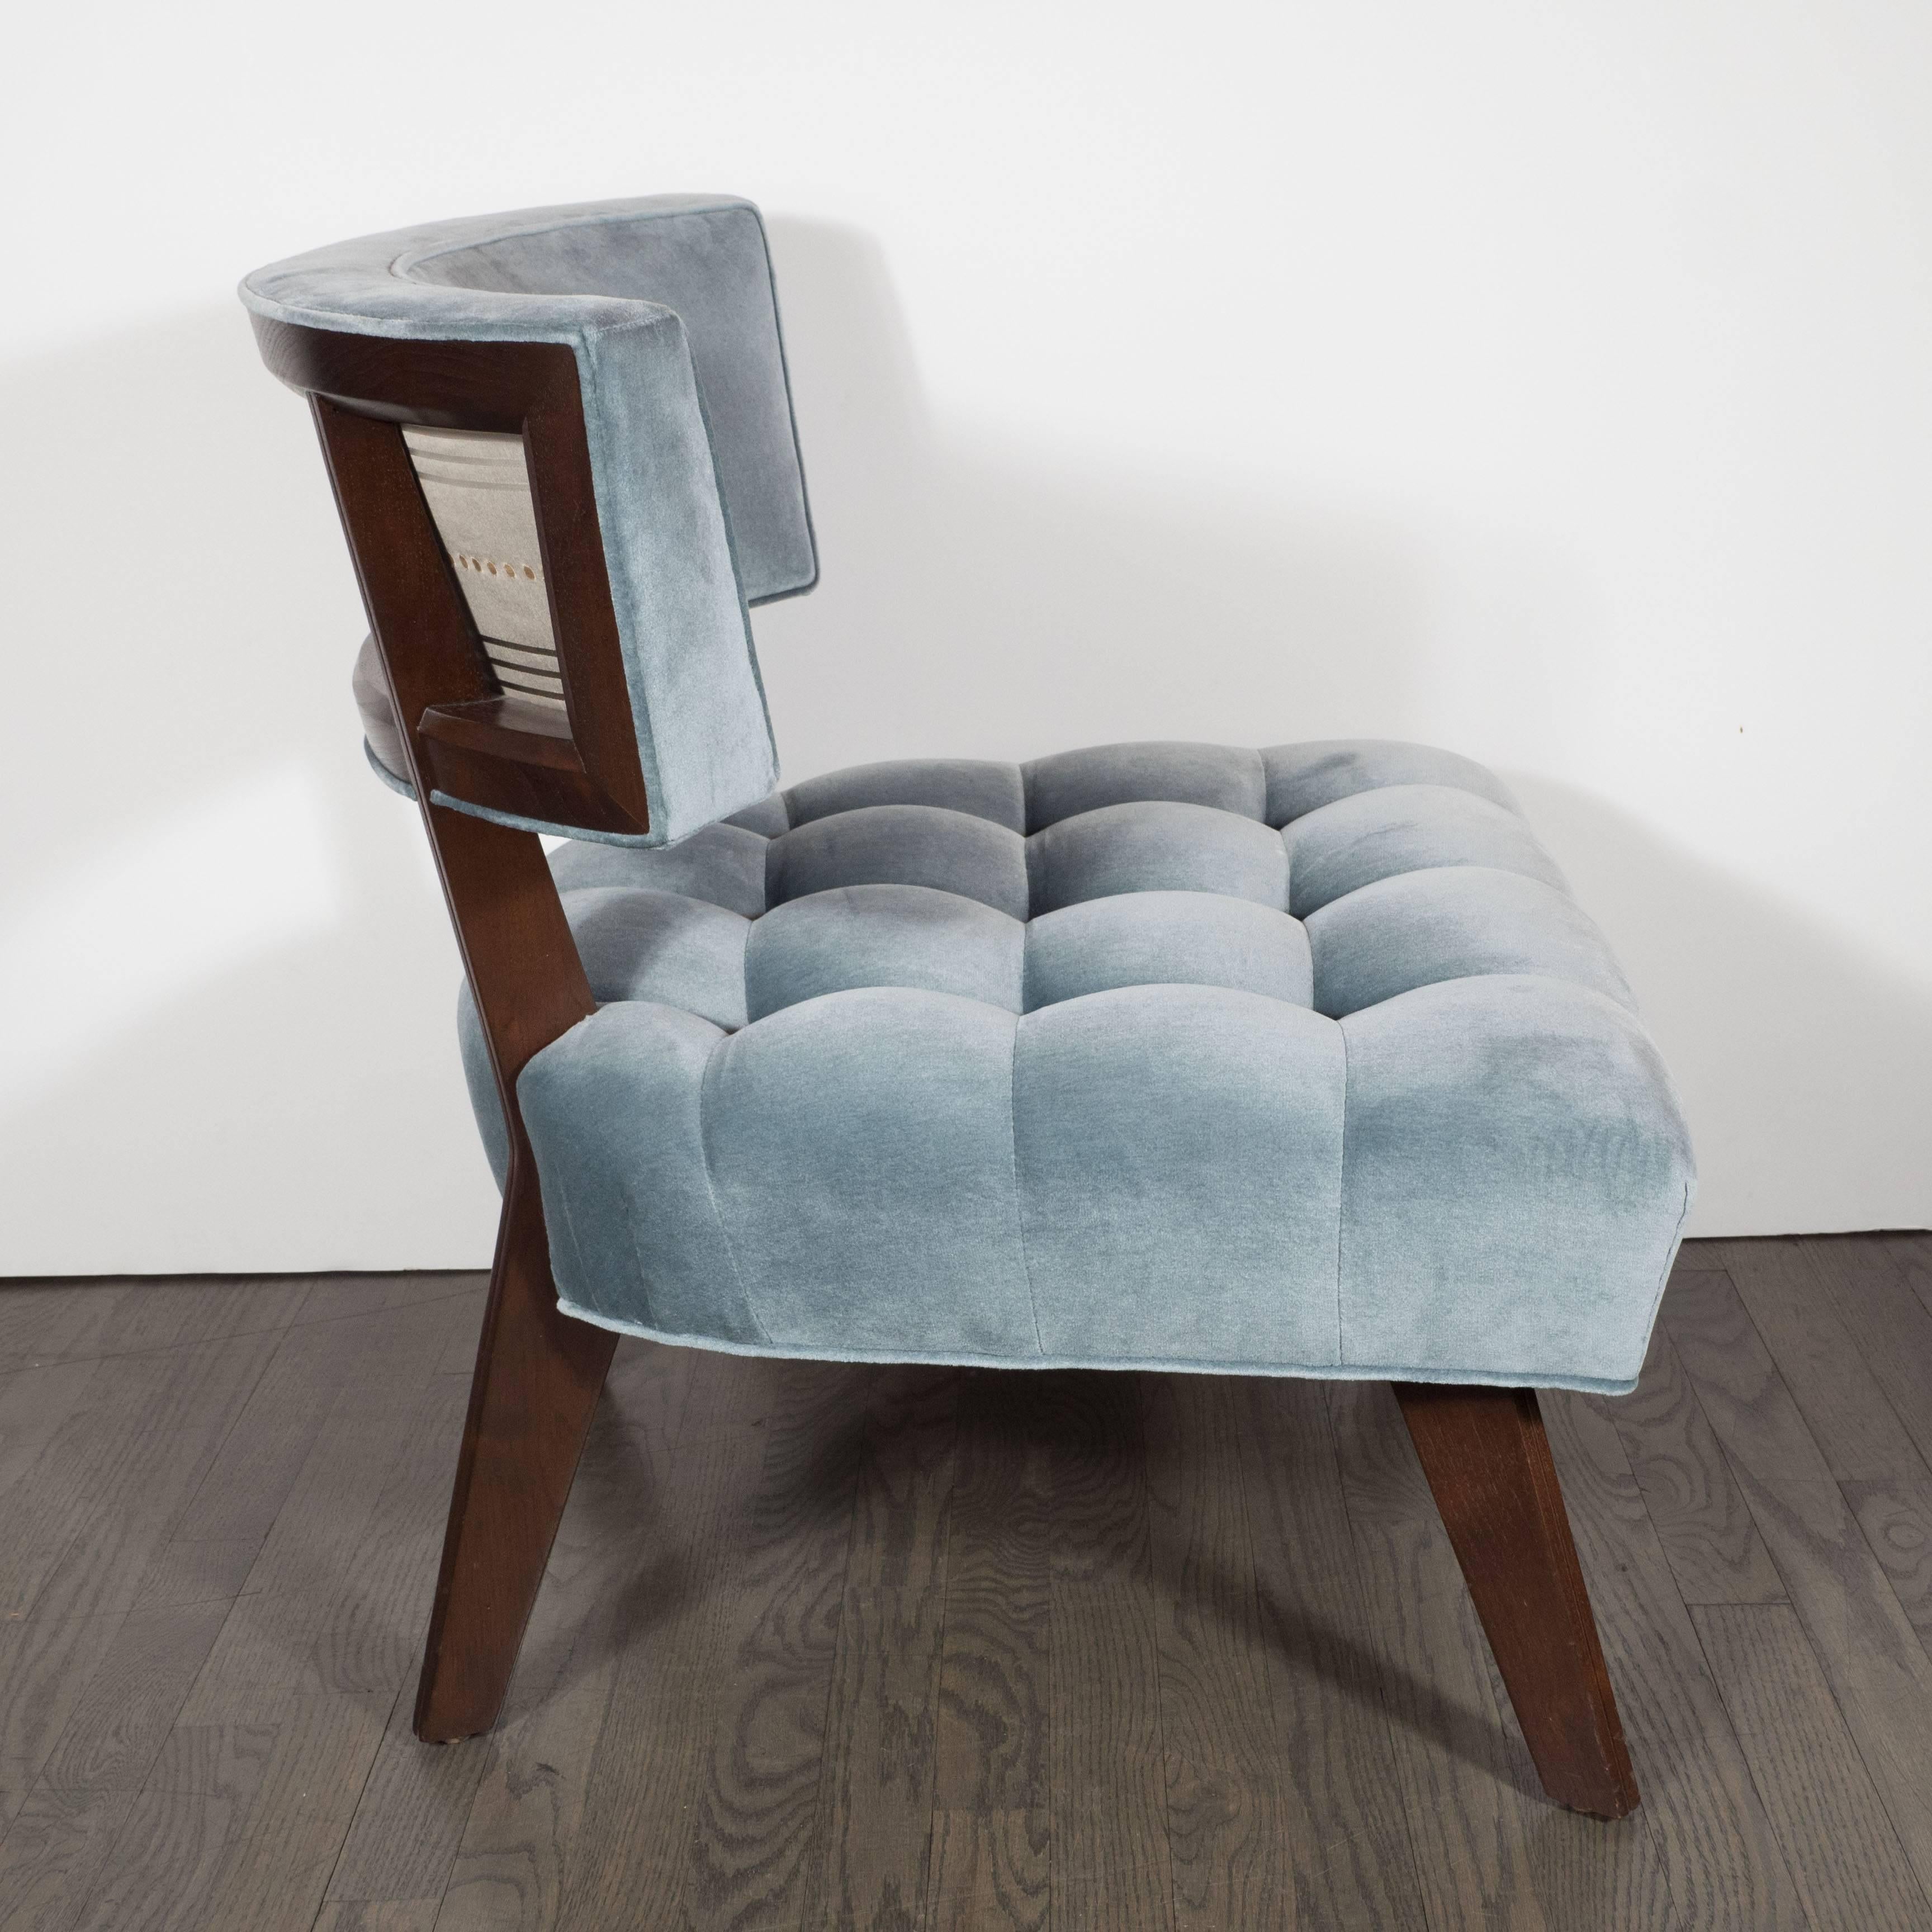 A ultra-chic pair of Mid-Century modernist Klismos chairs by Billy Haines in walnut and blue velvet and silk, attractive button tufted seat cushion is thick and comfortable, resting on 4 slanted dark walnut legs, the backrest in rich blue velvet is